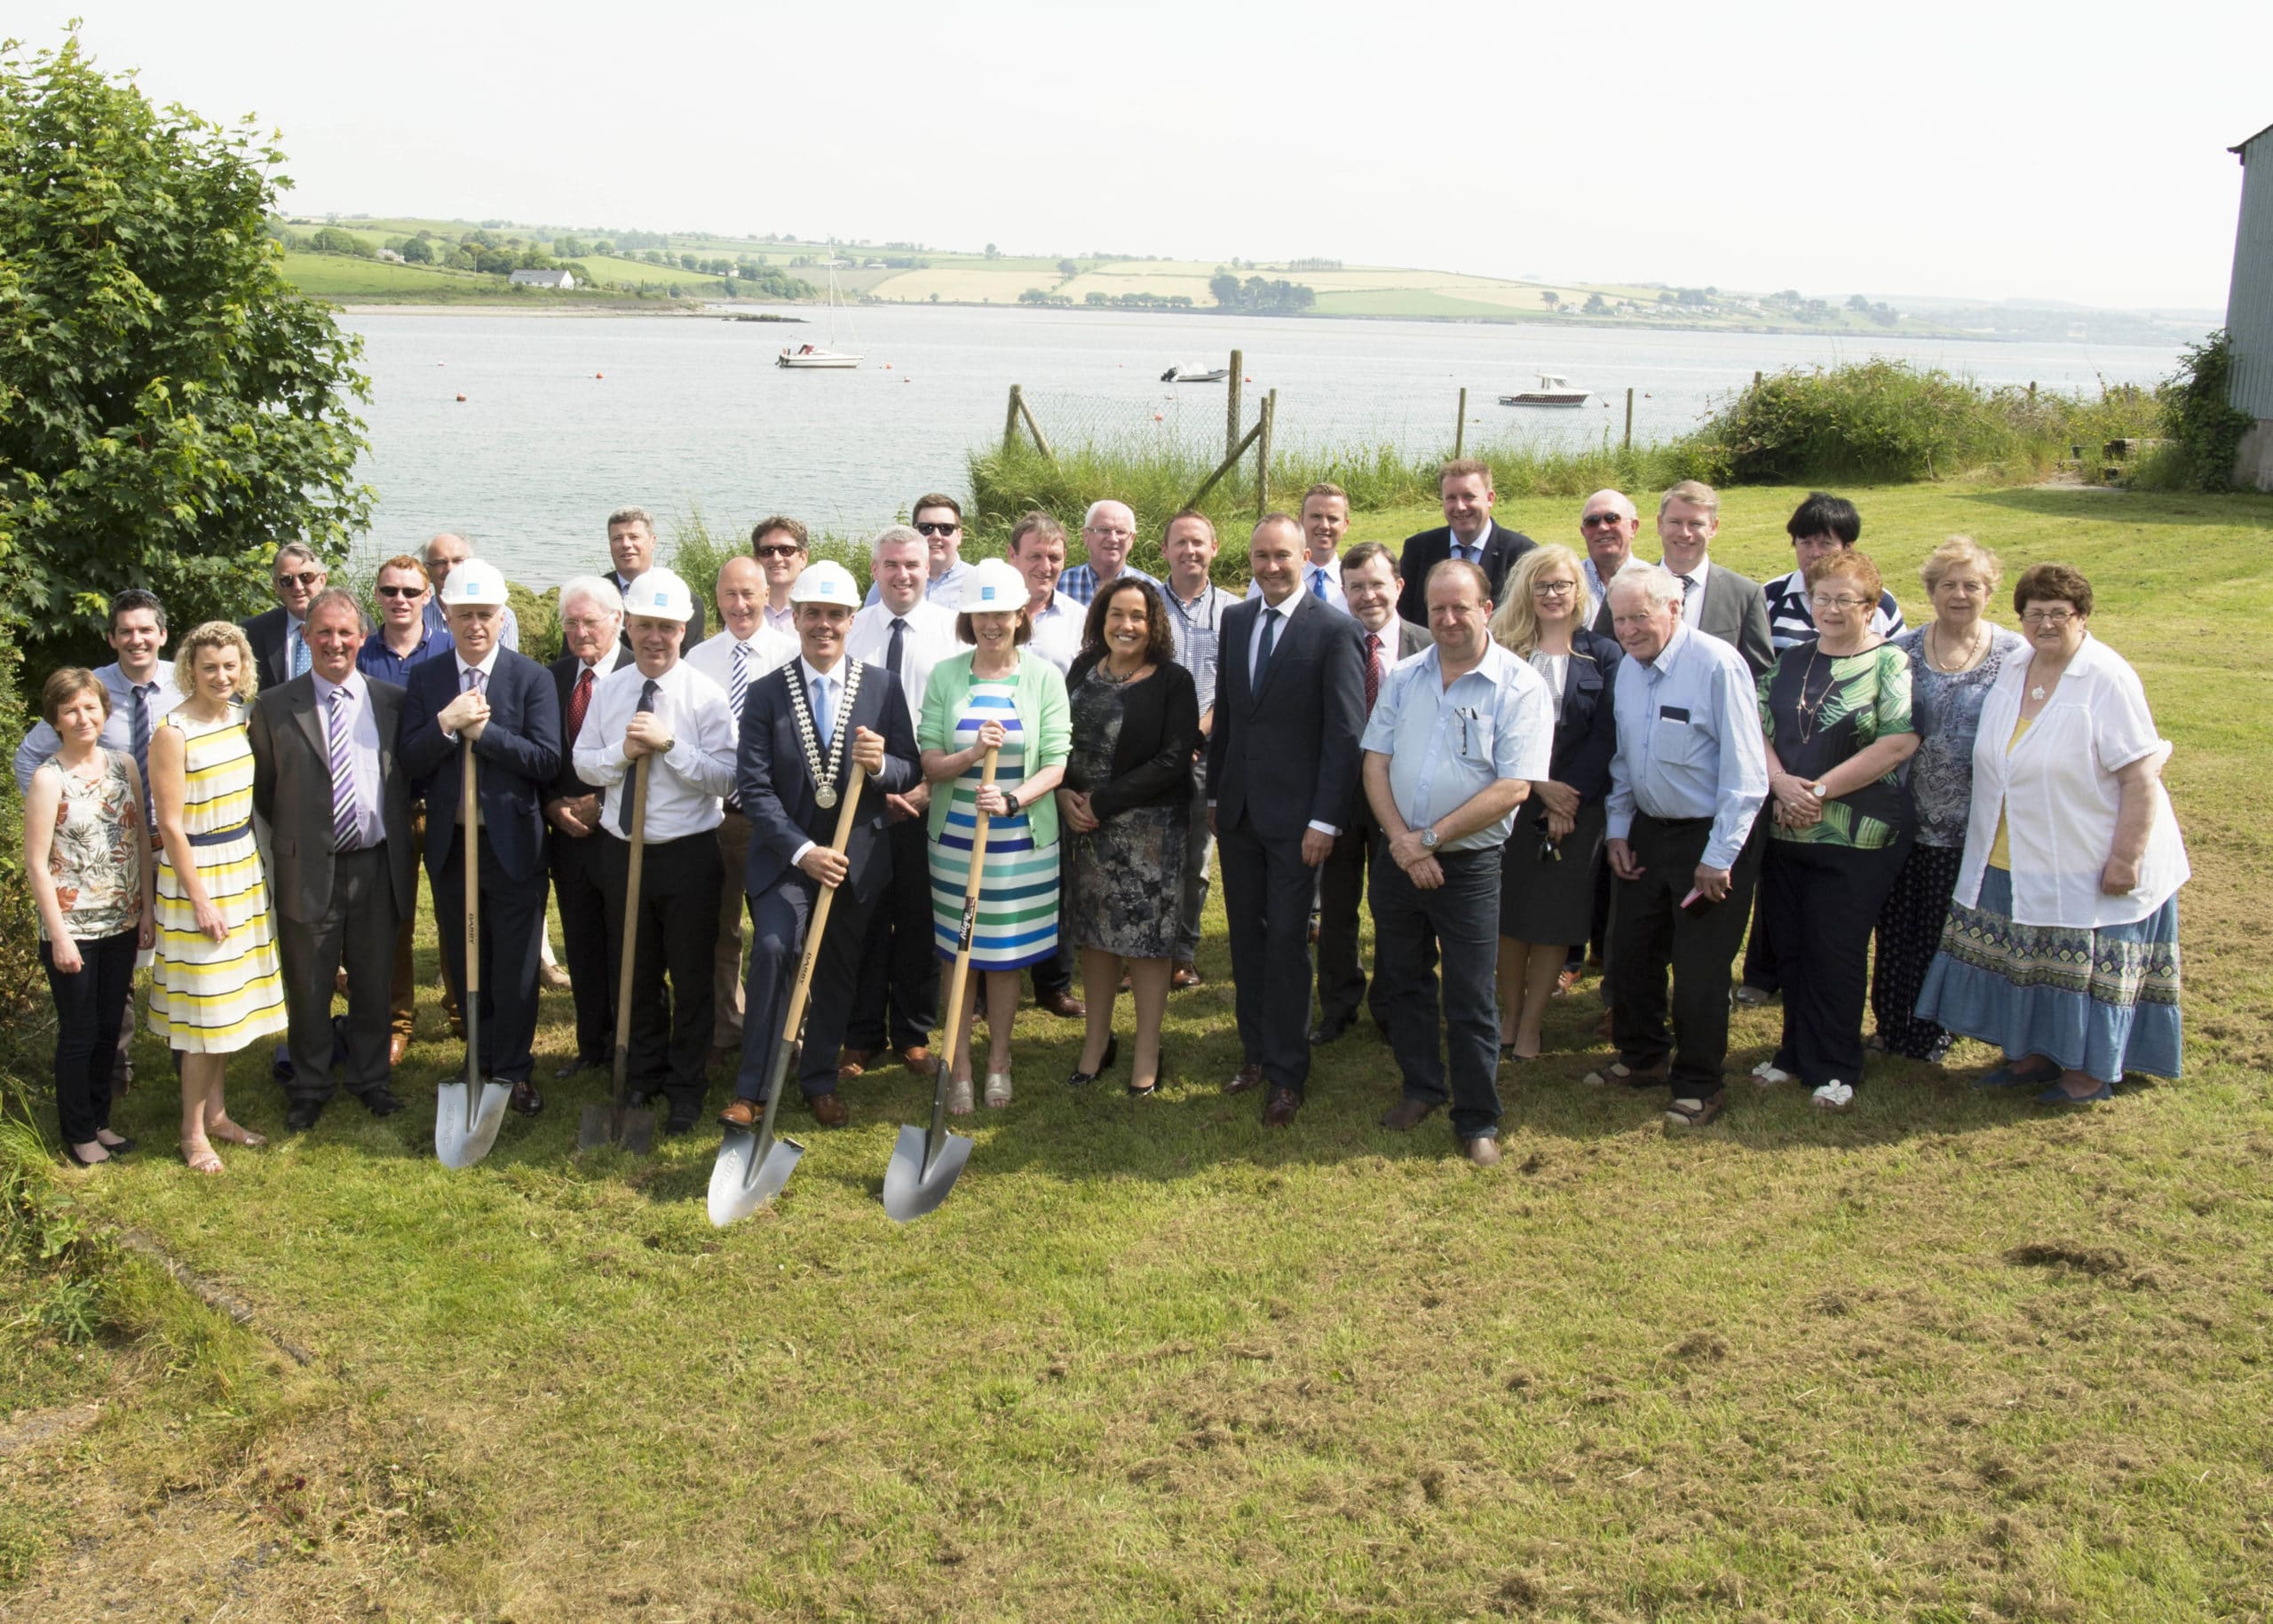 Completion of new Courtmacsherry-Timoleague Sewerage scheme will bring extensive benefits to local community